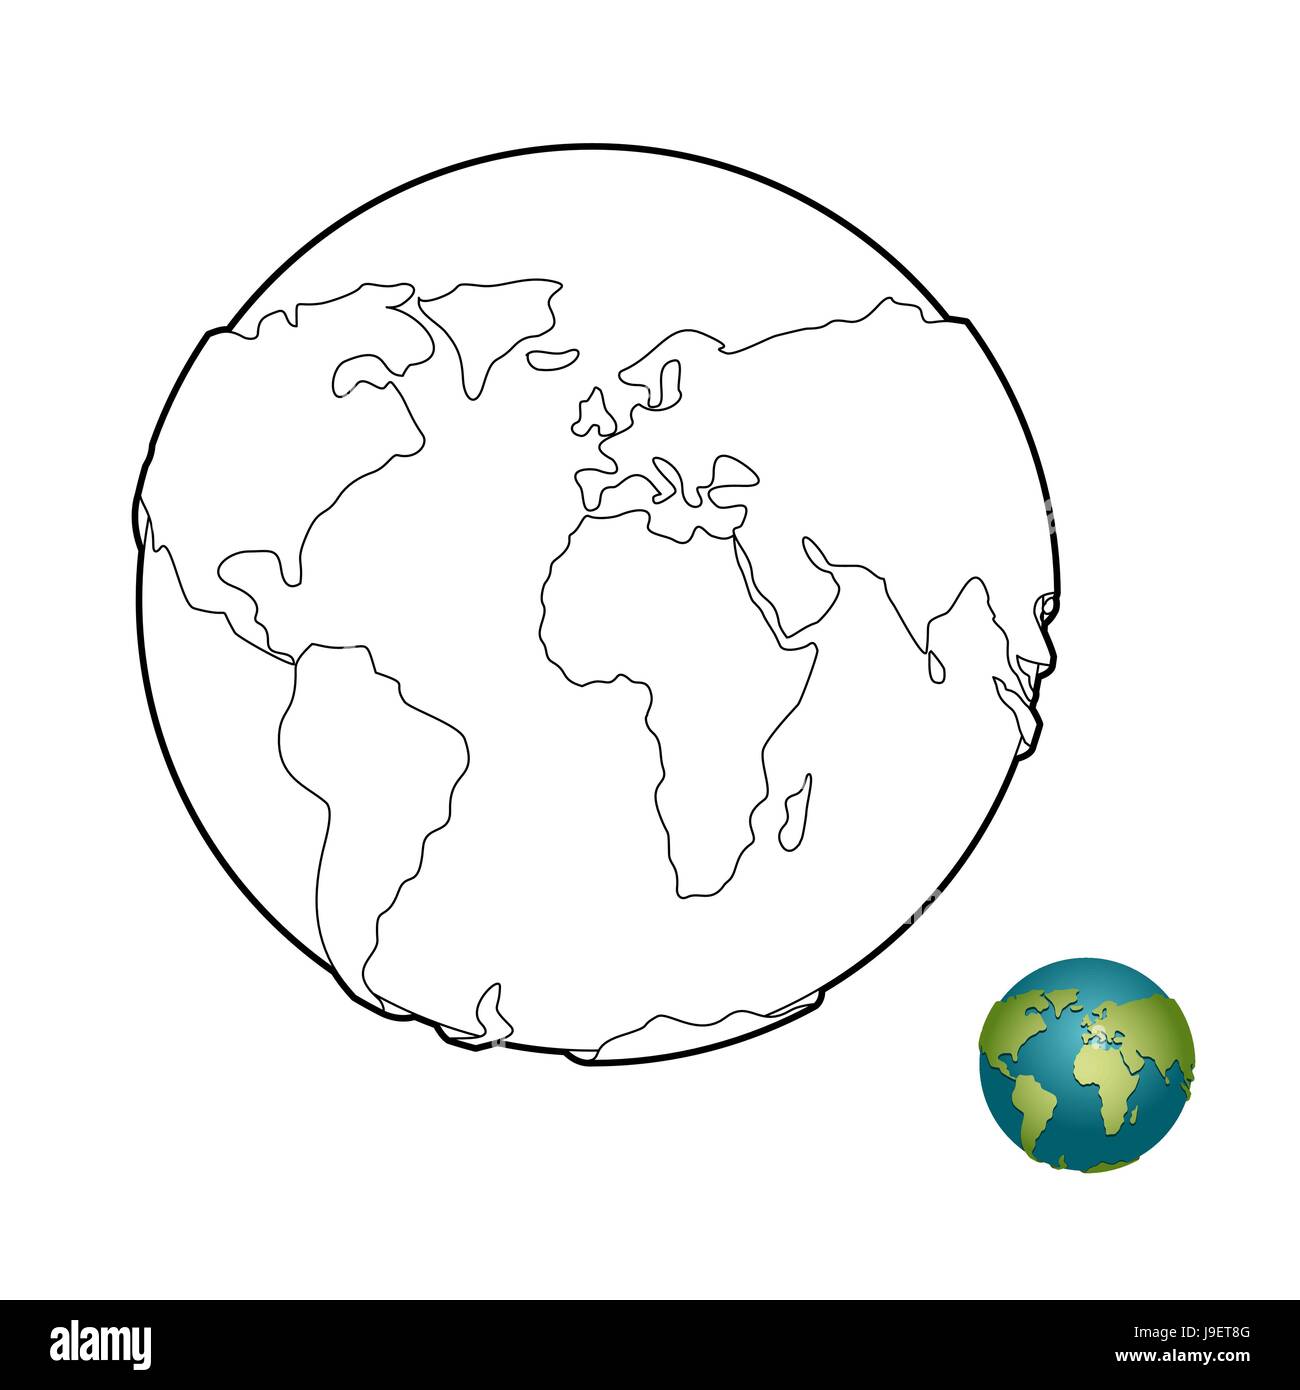 Earth coloring book. Heavenly body. Planet with mainlands. Globe for coloring. Stock Vector